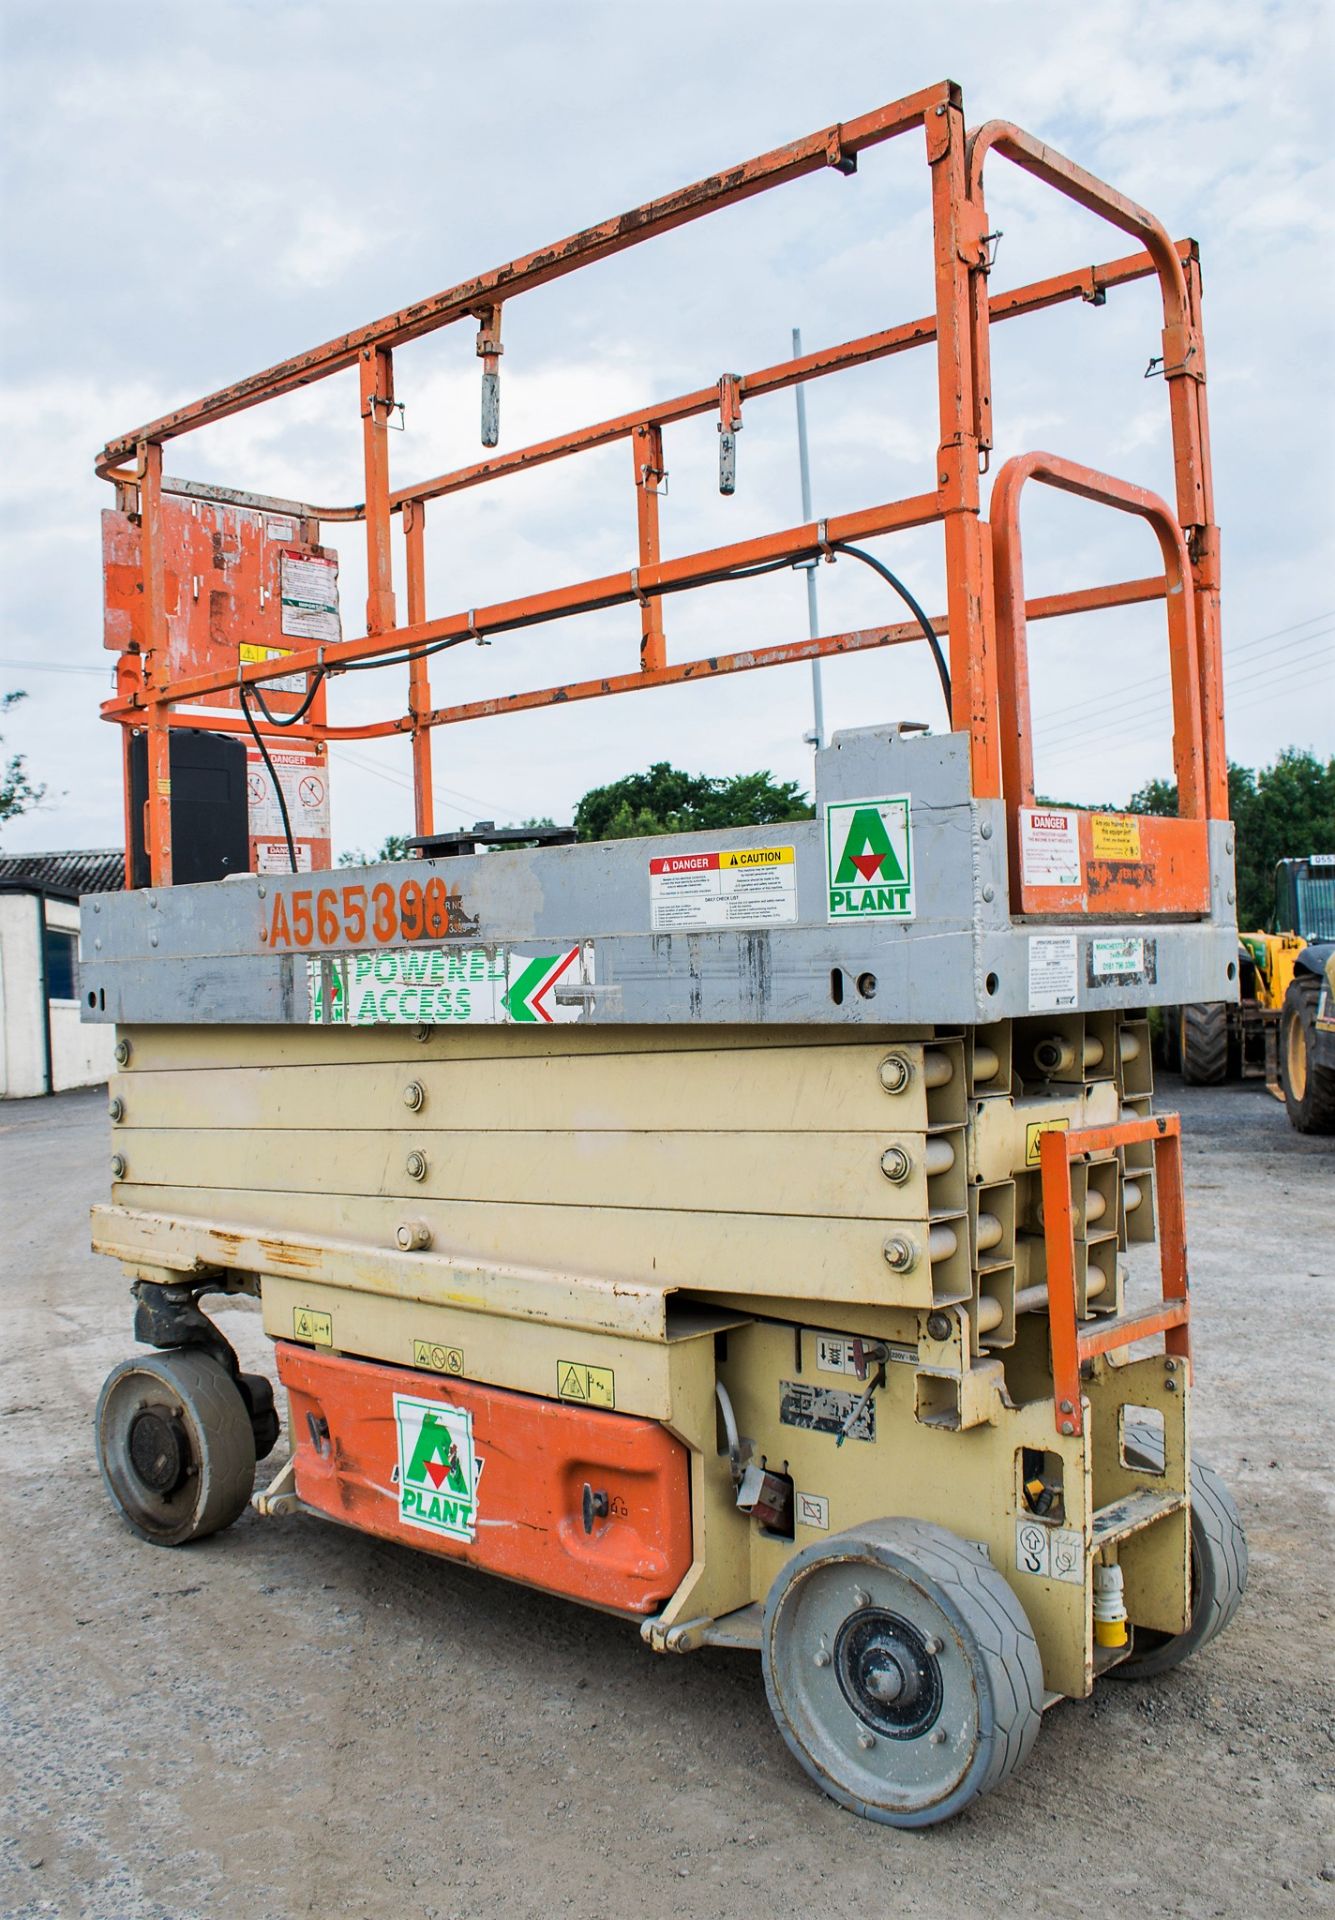 JLG 2630 26 ft battery electric scissor lift access platform Year: 2011 S/N: 1940 A565398 ** - Image 2 of 7